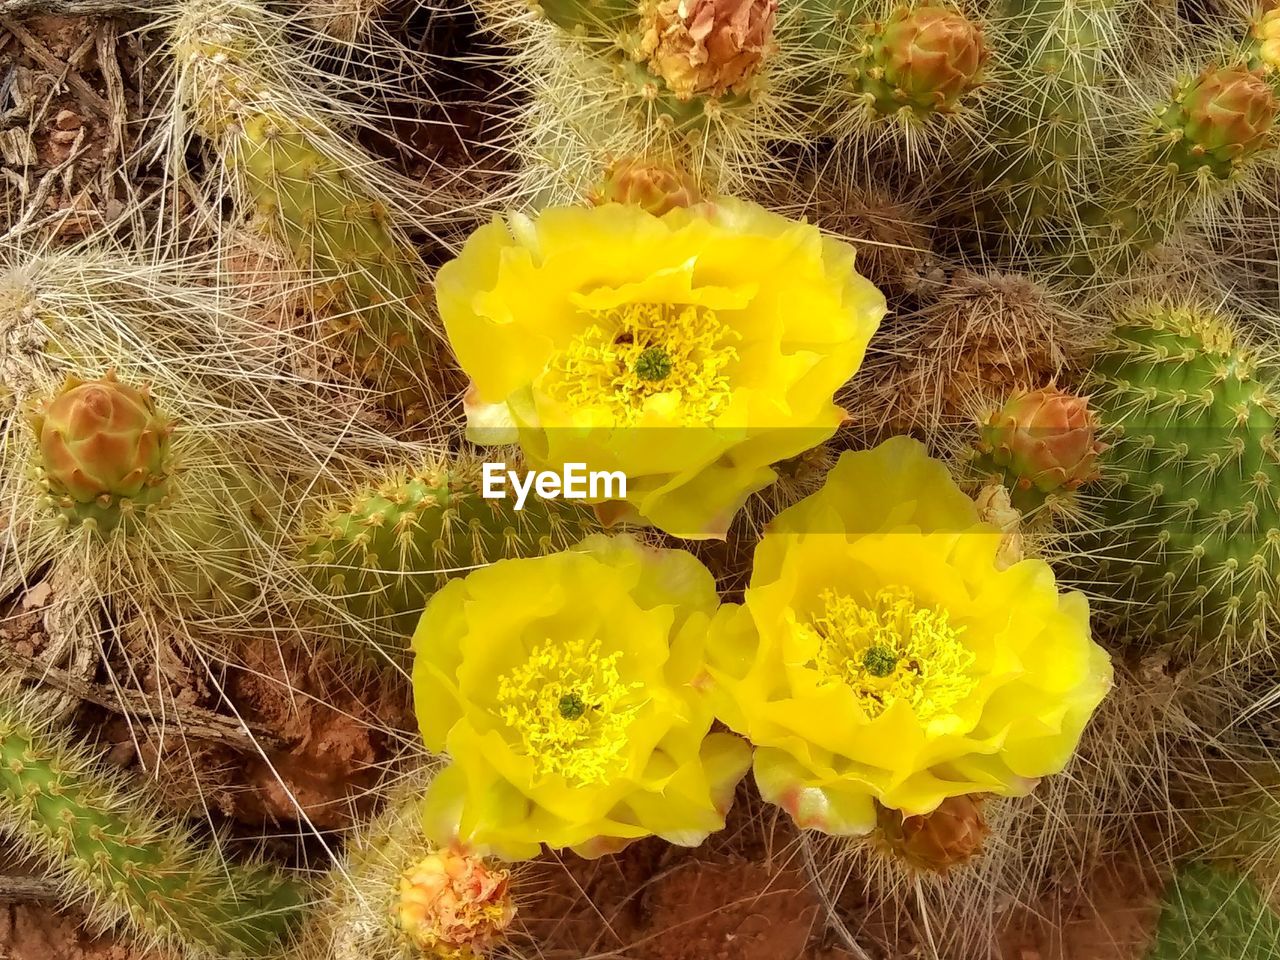 HIGH ANGLE VIEW OF YELLOW CACTUS FLOWERS